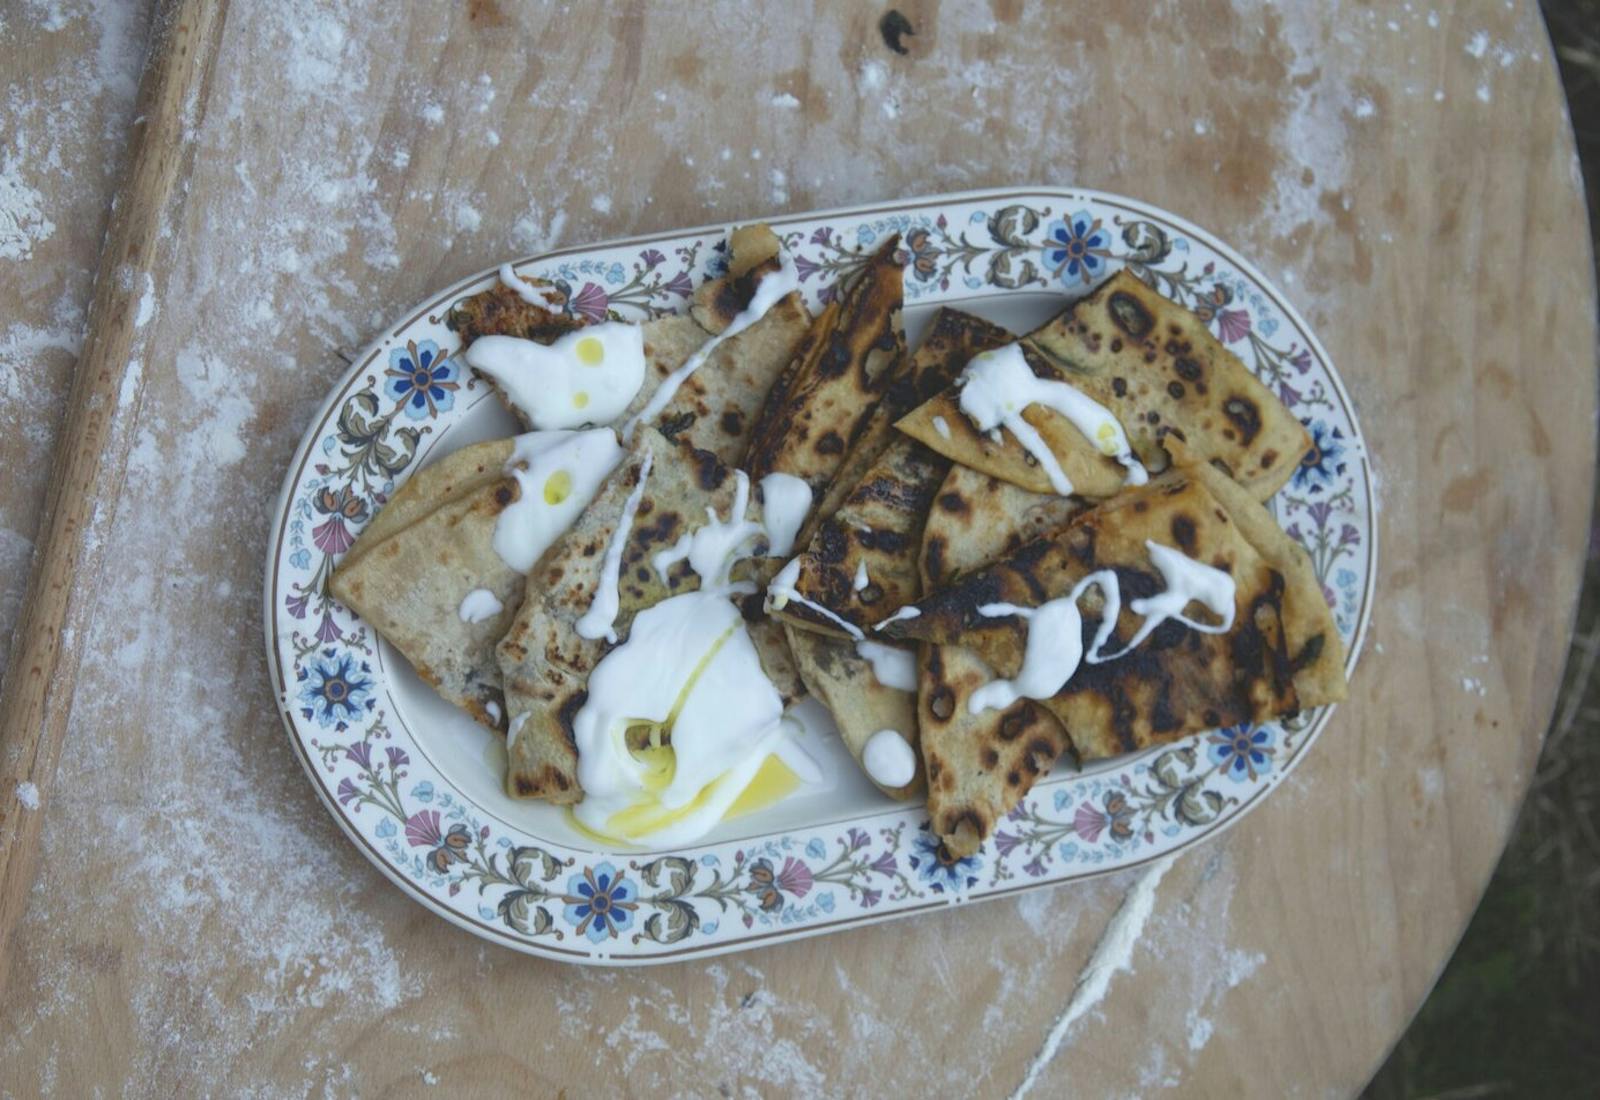 Pita with drizzle of yogurt and olive oil on floral tray, atop wooden surface.